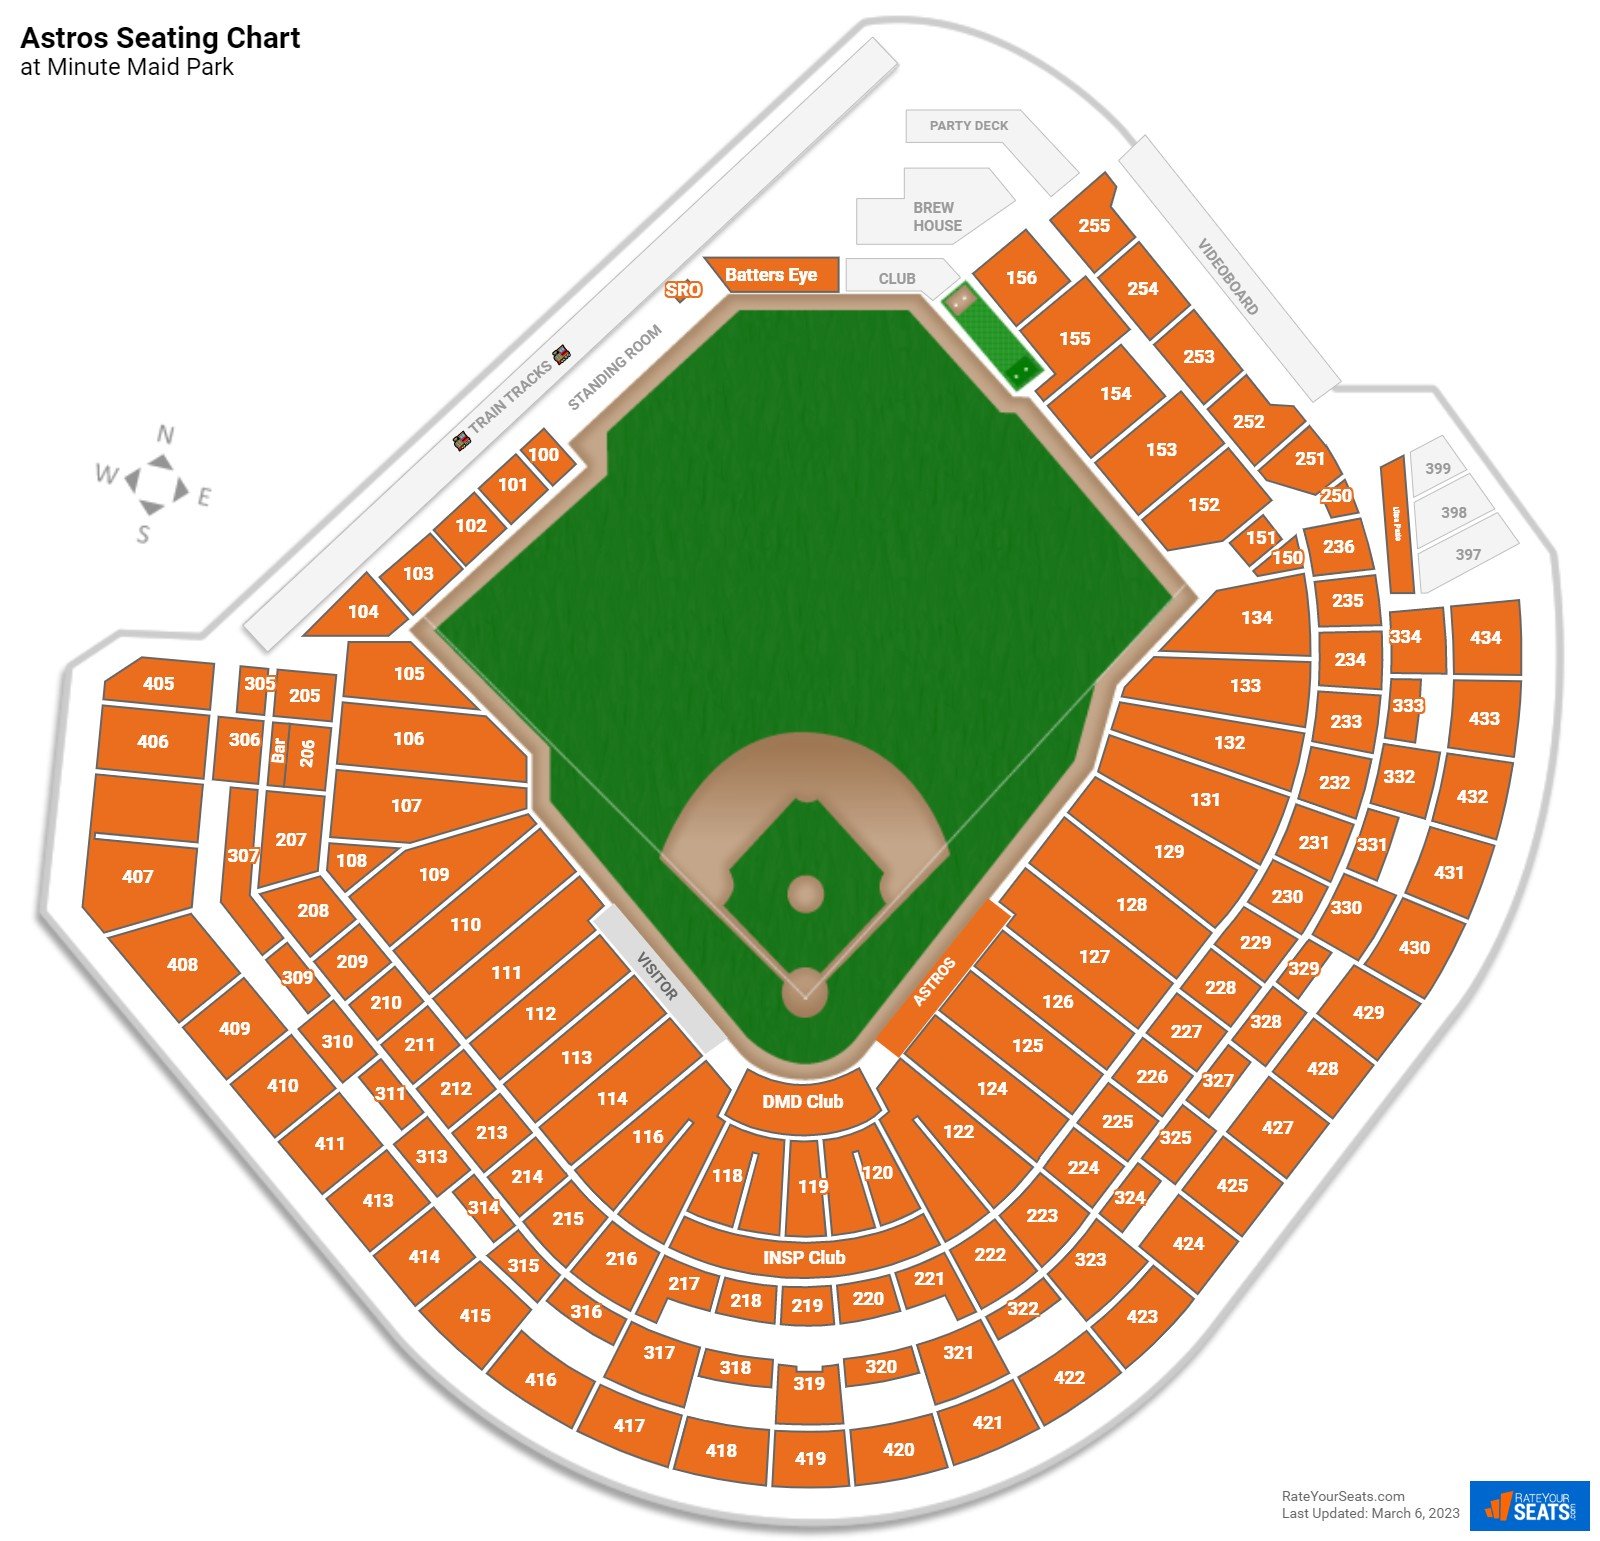 Houston Astros Seating Chart at Minute Maid Park